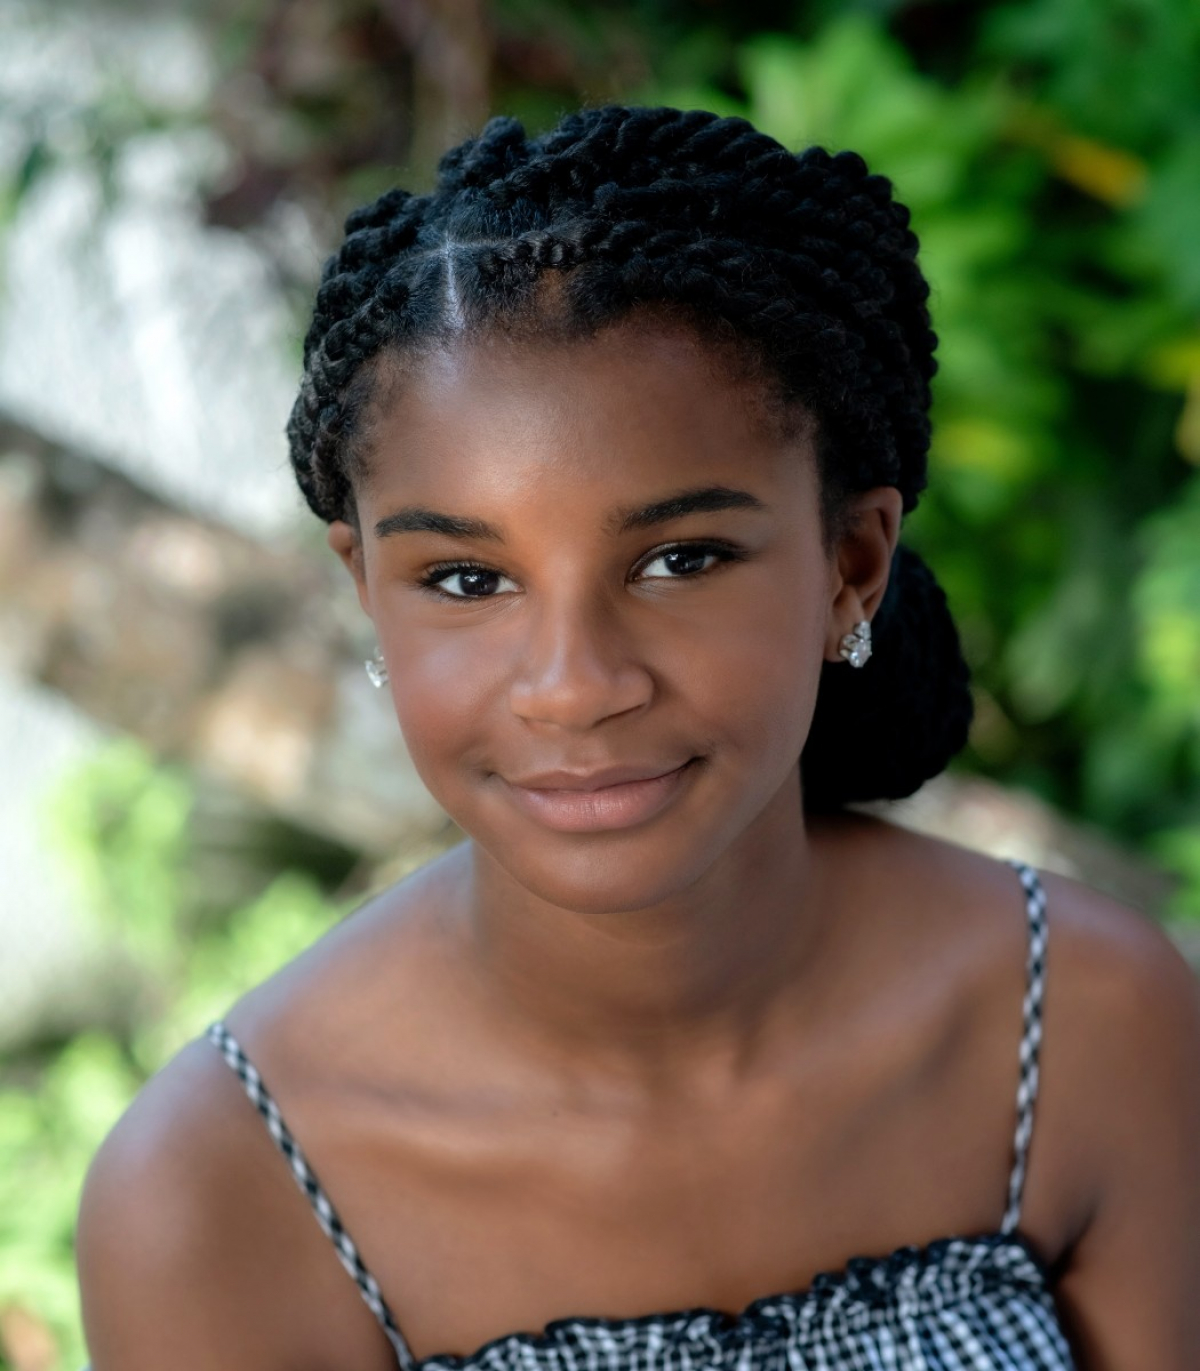 Marley Dias, author, executive producer, and founder of #1000BlackGirlBooks, is joining the American Library Association and libraries nationwide in promoting the power of a library card this September.  As honorary chair, Dias wants to remind the public that signing up for a library card provides access to technology, multimedia content and educational programming that transforms lives and strengthens communities. “A library card provides opportunity for discovery and access to a rich and diverse world. It empowers you to make change and experience new stories,&quot; said Dias.